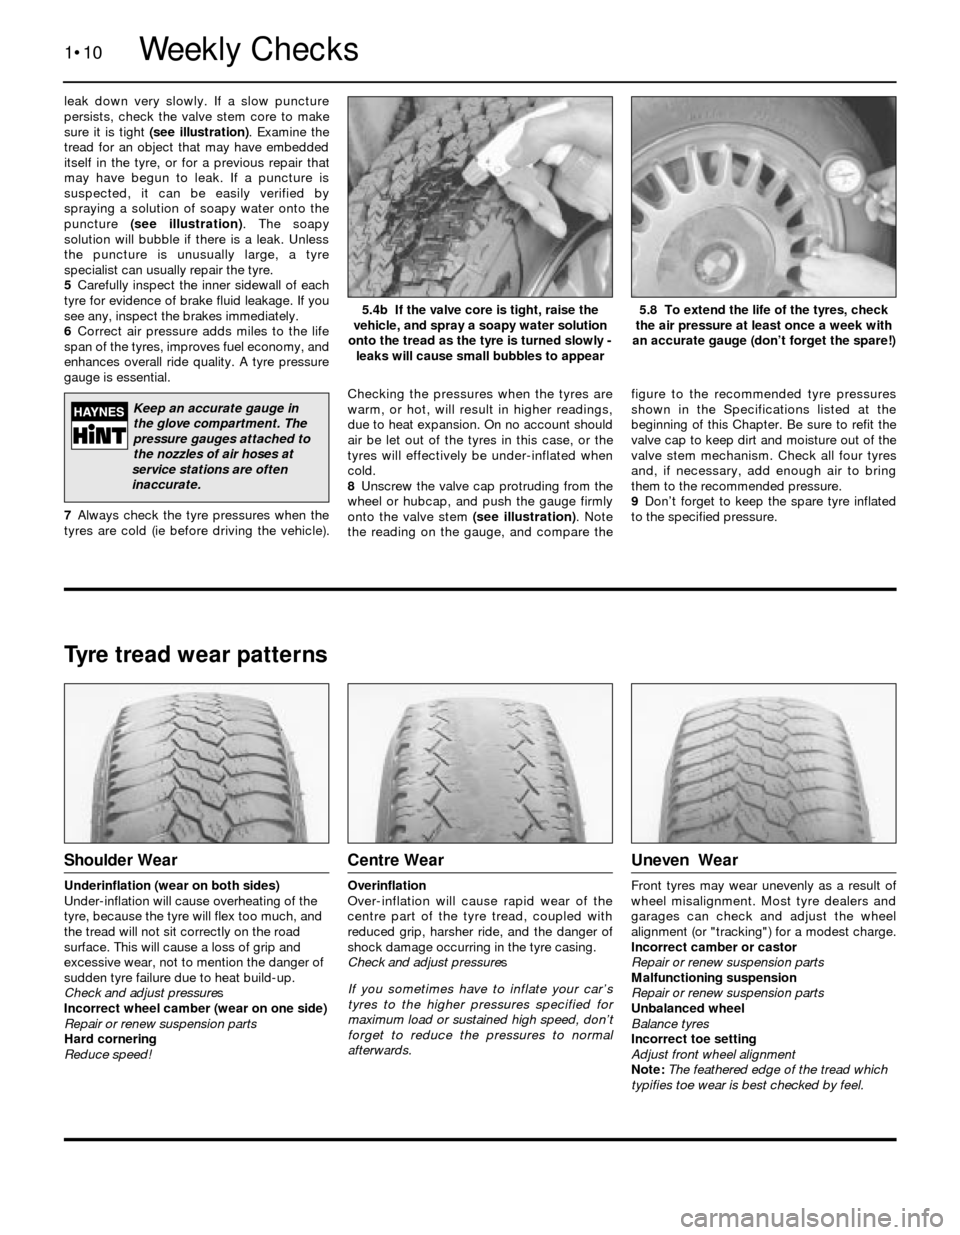 BMW 3 SERIES 1988 E30 Workshop Manual leak down very slowly. If a slow puncture
persists, check the valve stem core to make
sure it is tight (see illustration). Examine the
tread for an object that may have embedded
itself in the tyre, or